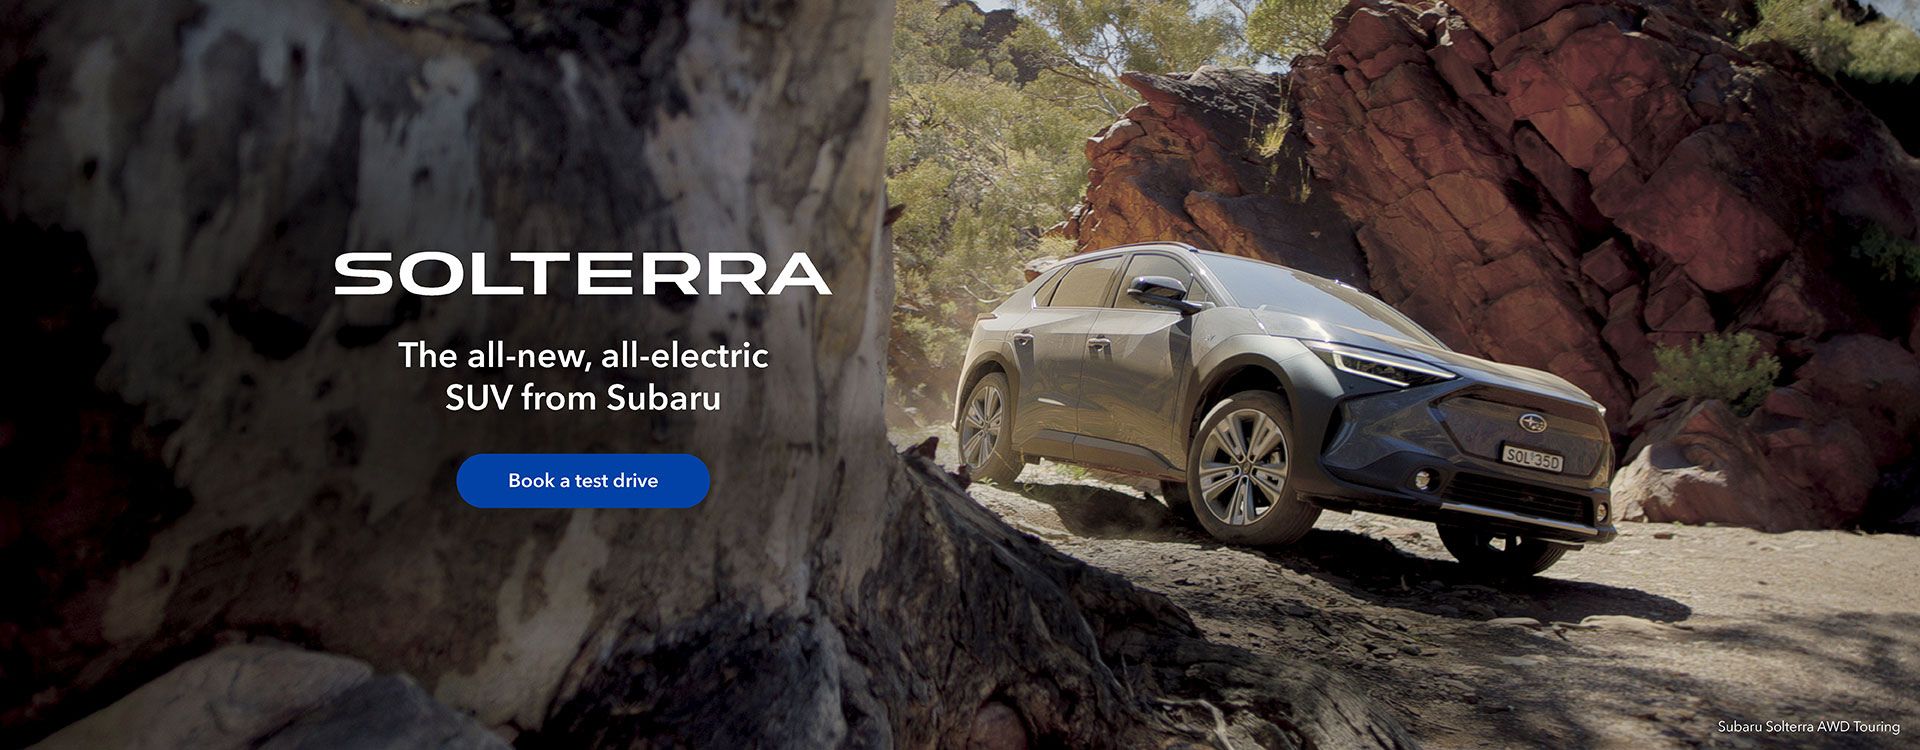 Solterra - The all-new, all-electric SUV from Subaru - Book a test drive